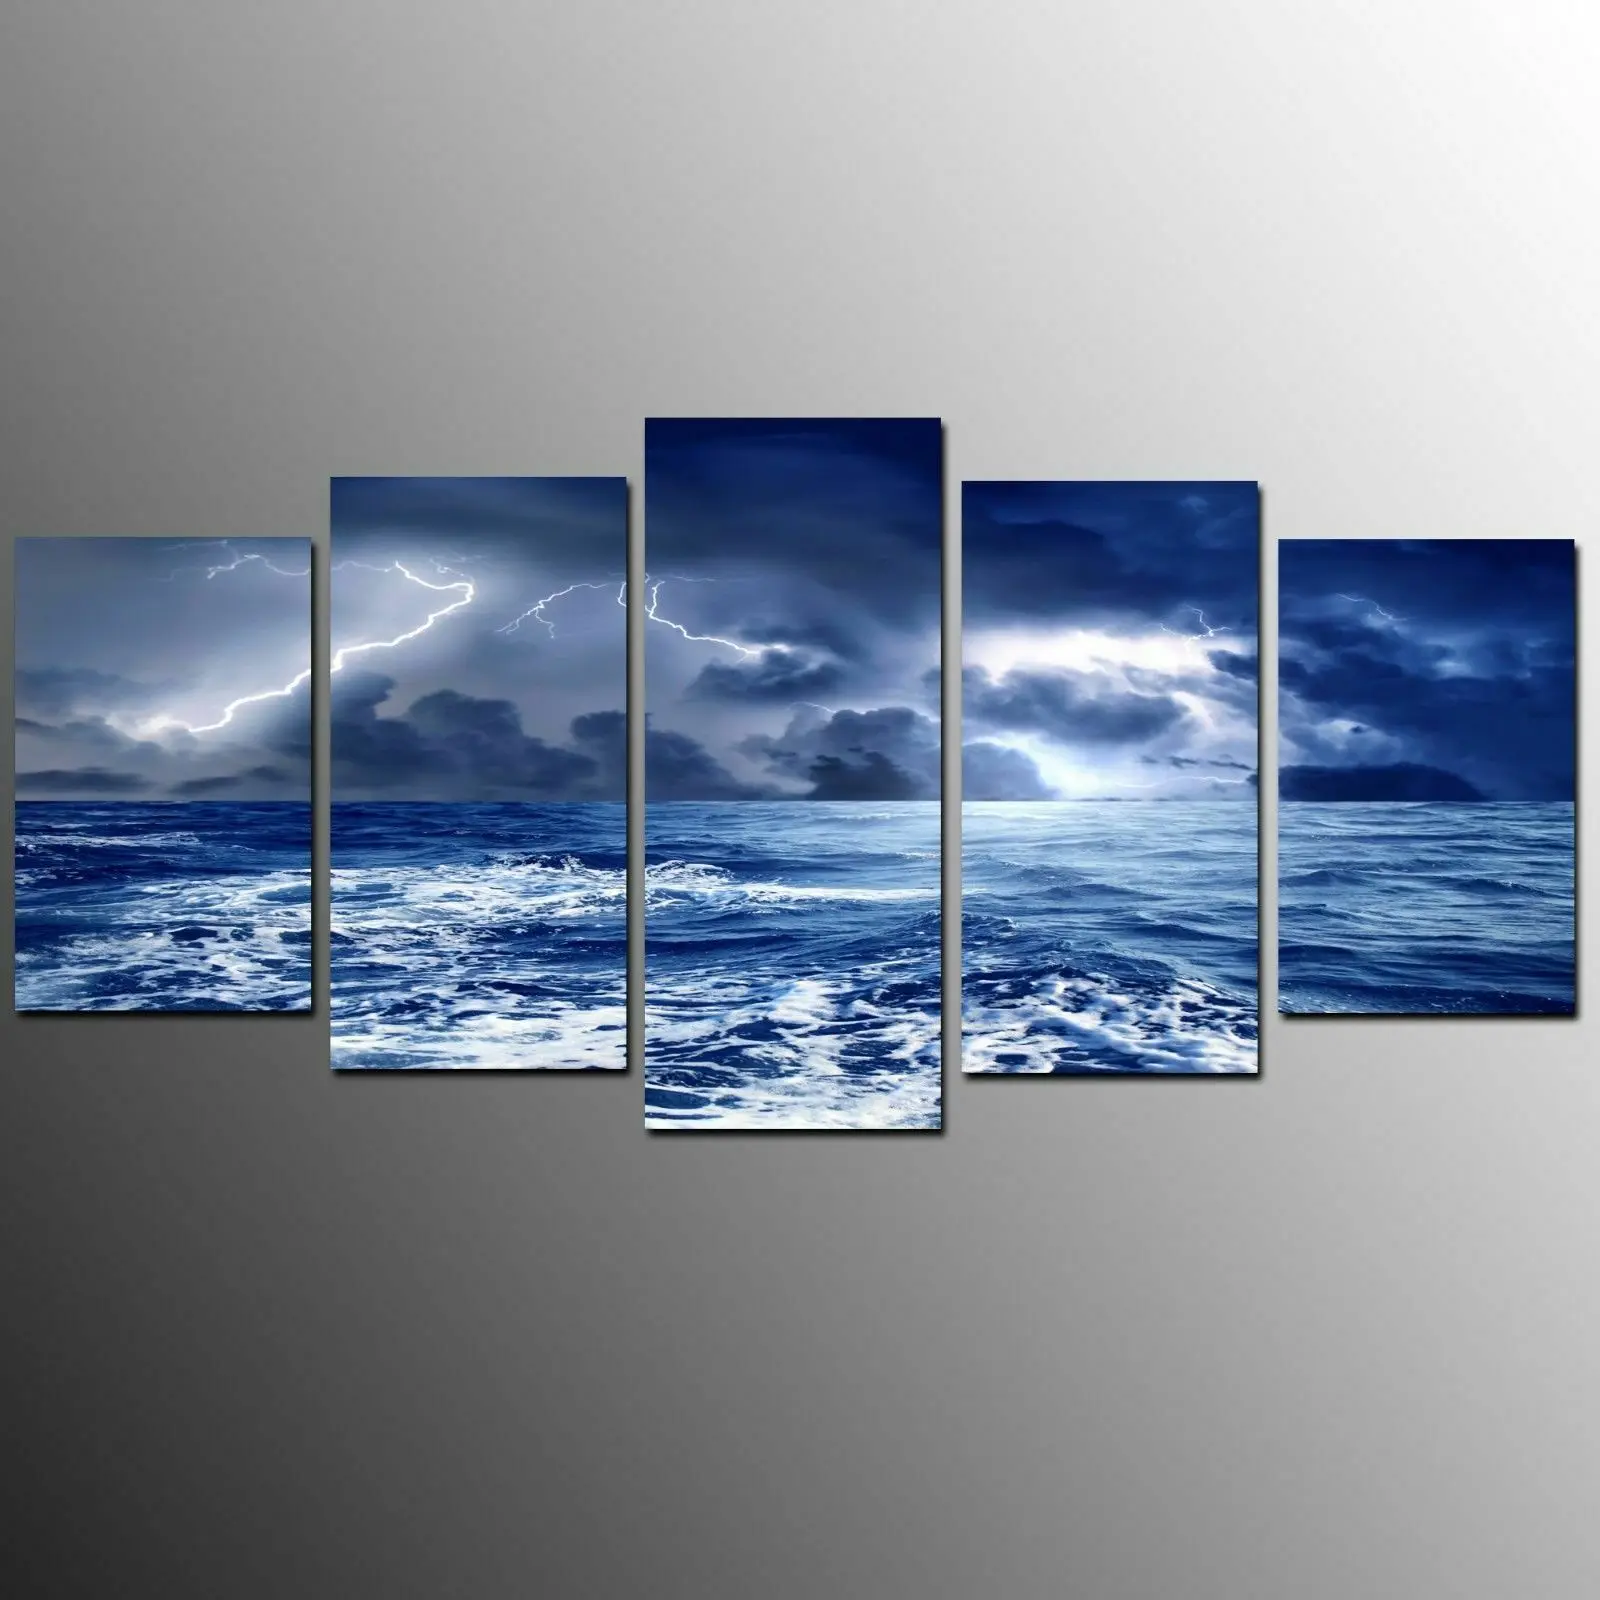 

5 Pcs Canvas Picture Print Wall Art Canvas Painting Wall Decor for Living Room Lightning Sea Storm Sky Cloud Poster No Framed